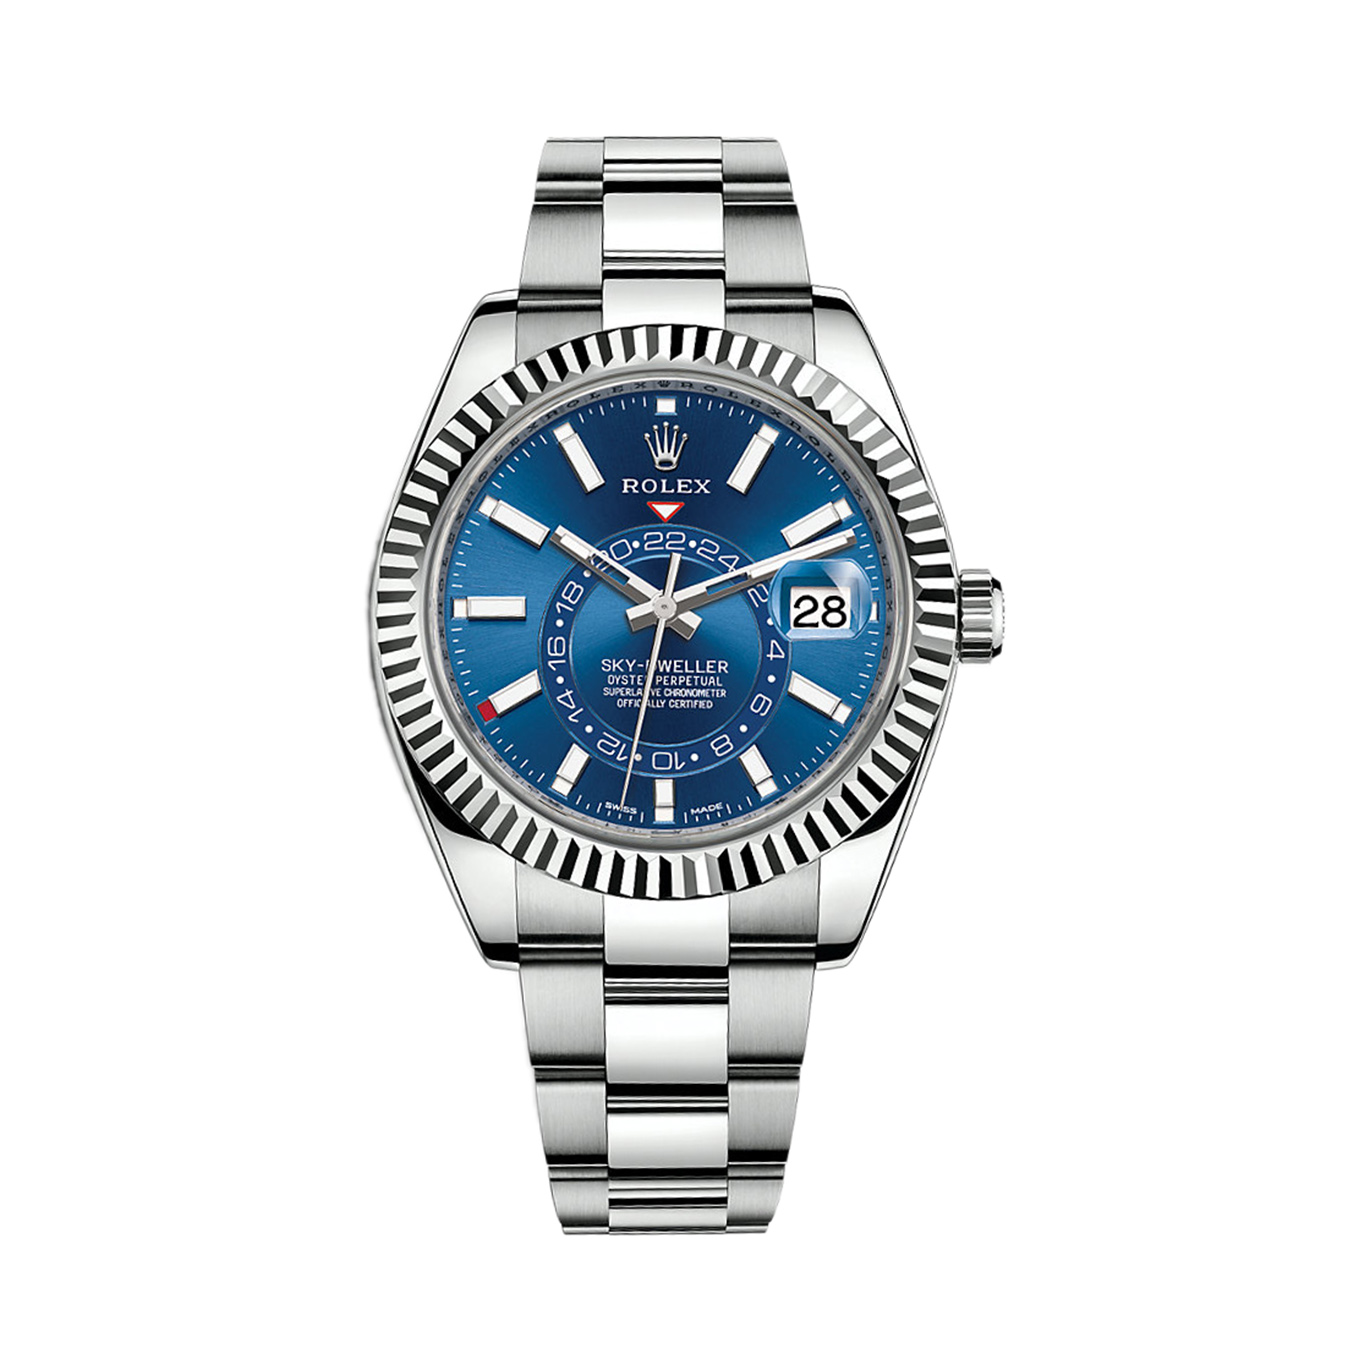 Sky-Dweller 326934 White Gold & Stainless Steel Watch (Blue)